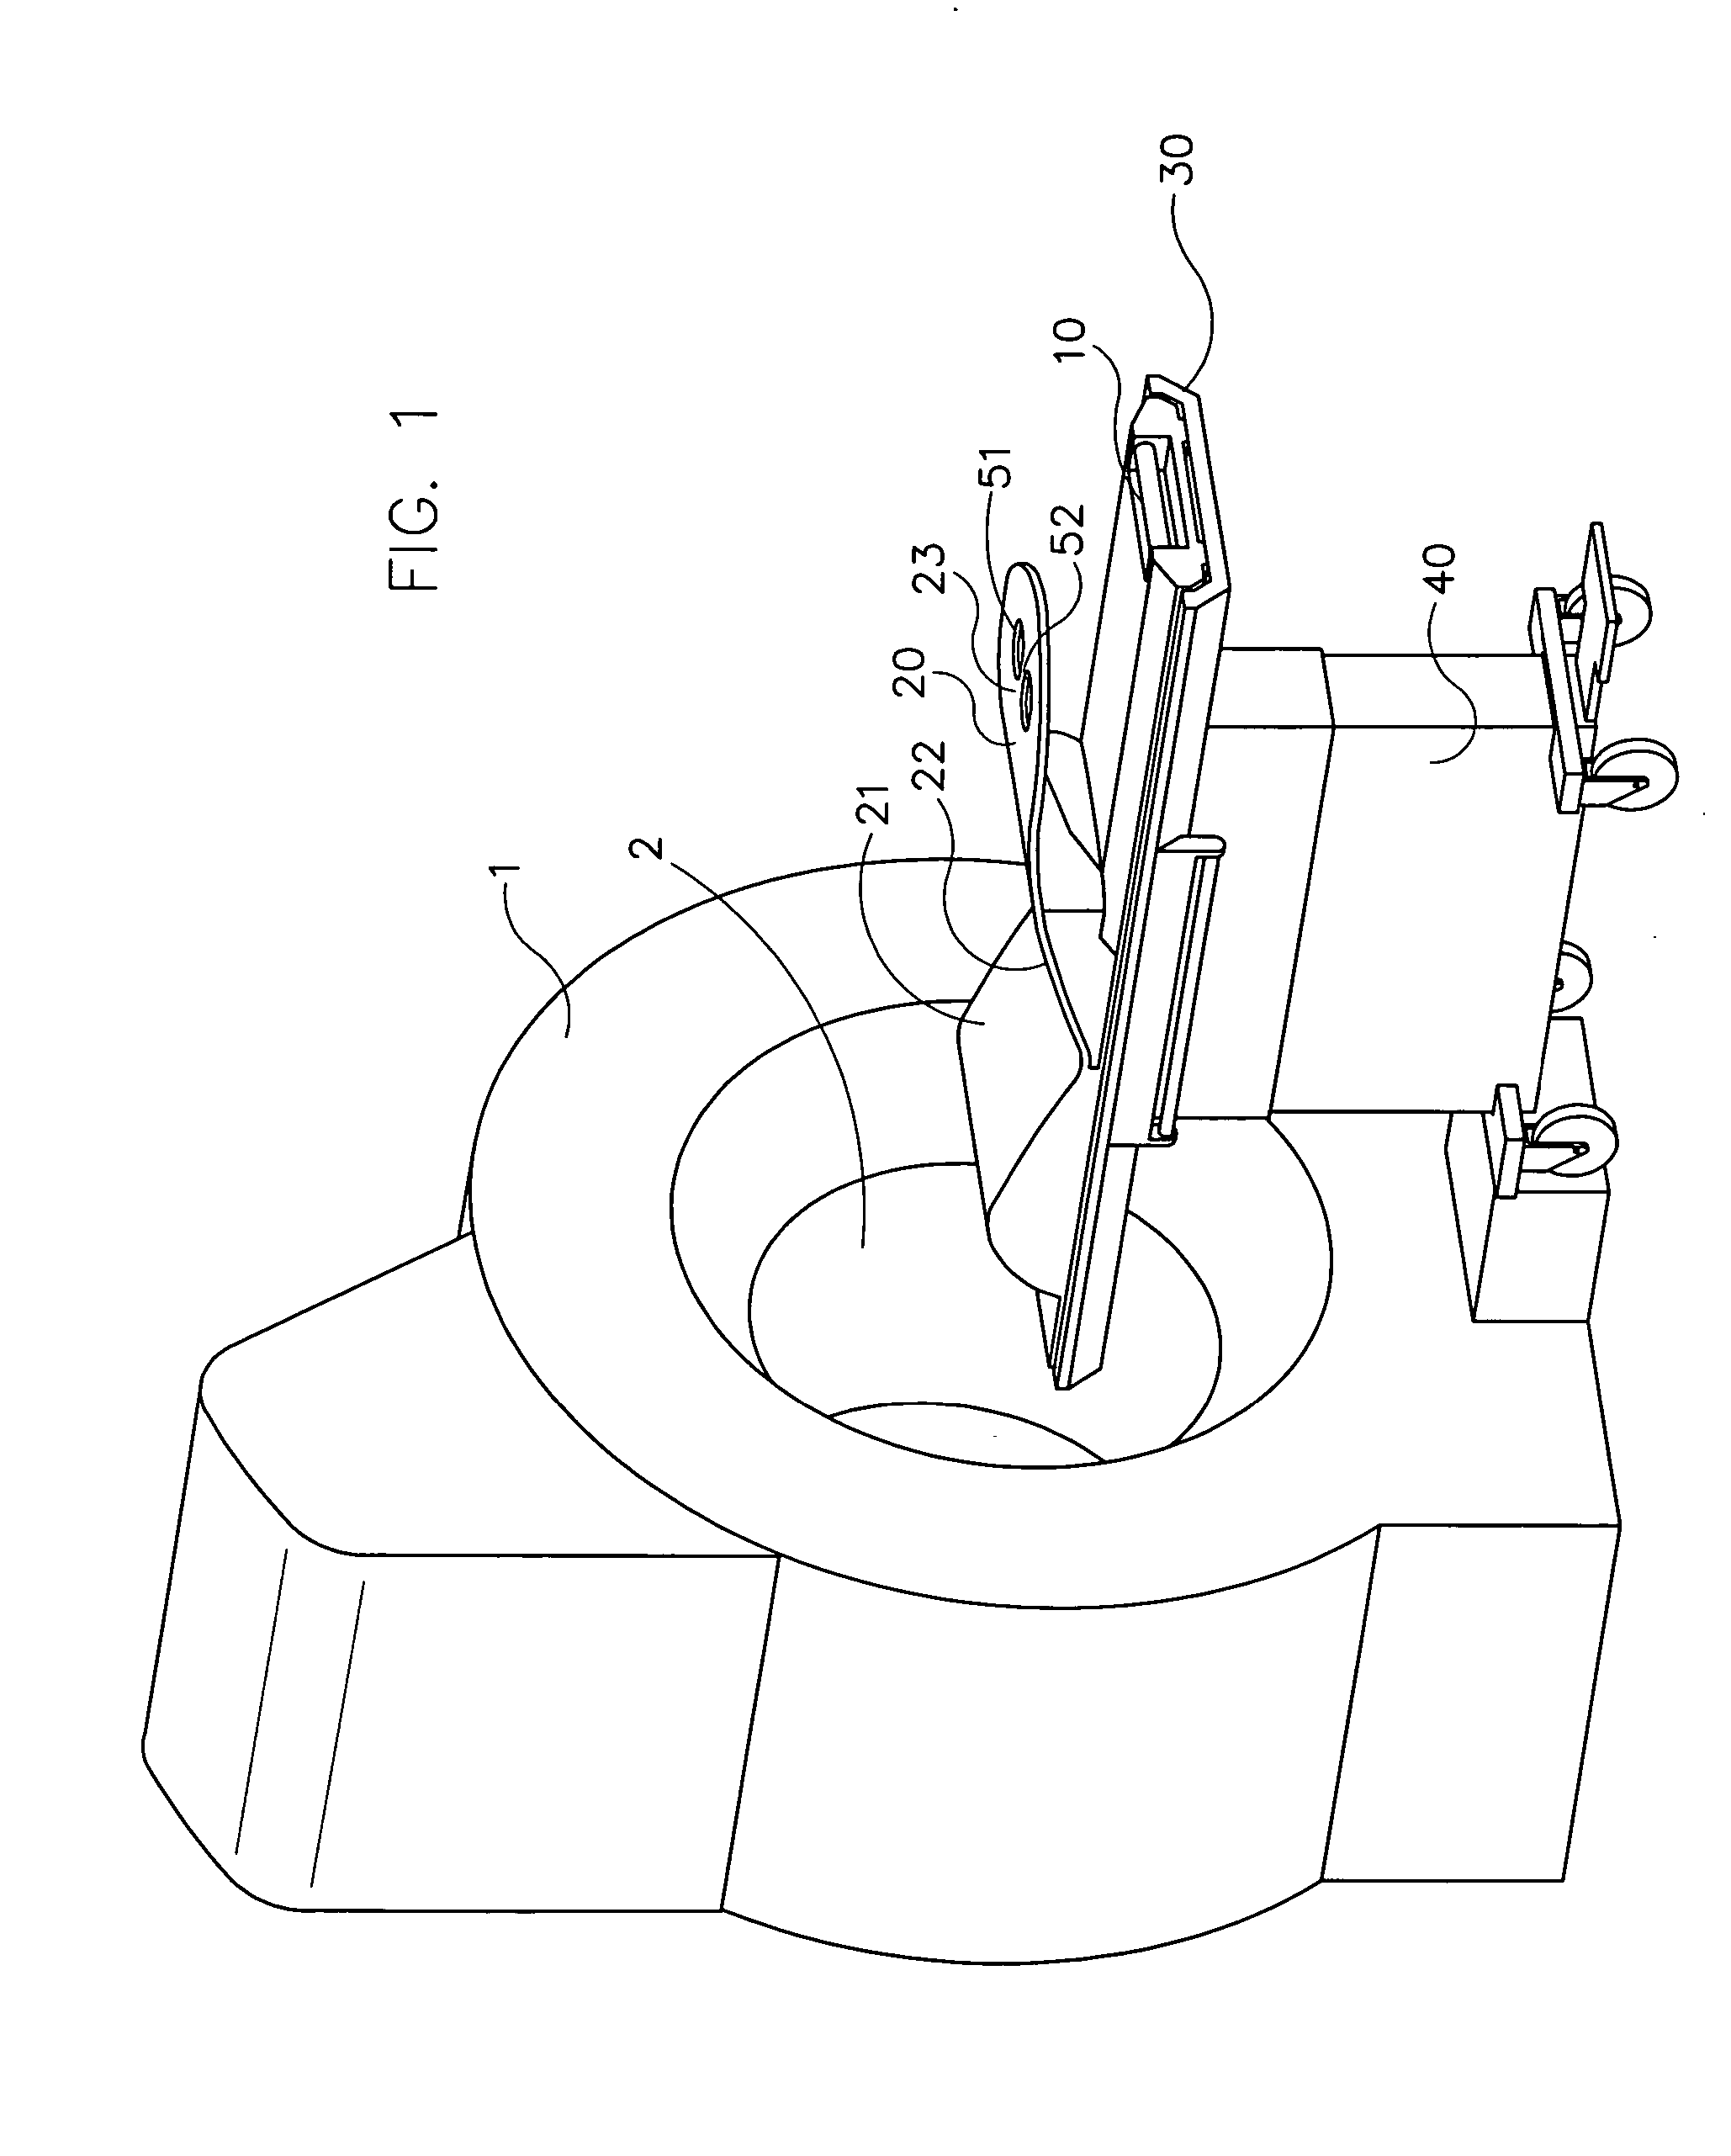 Method and apparatus for improved breast imaging